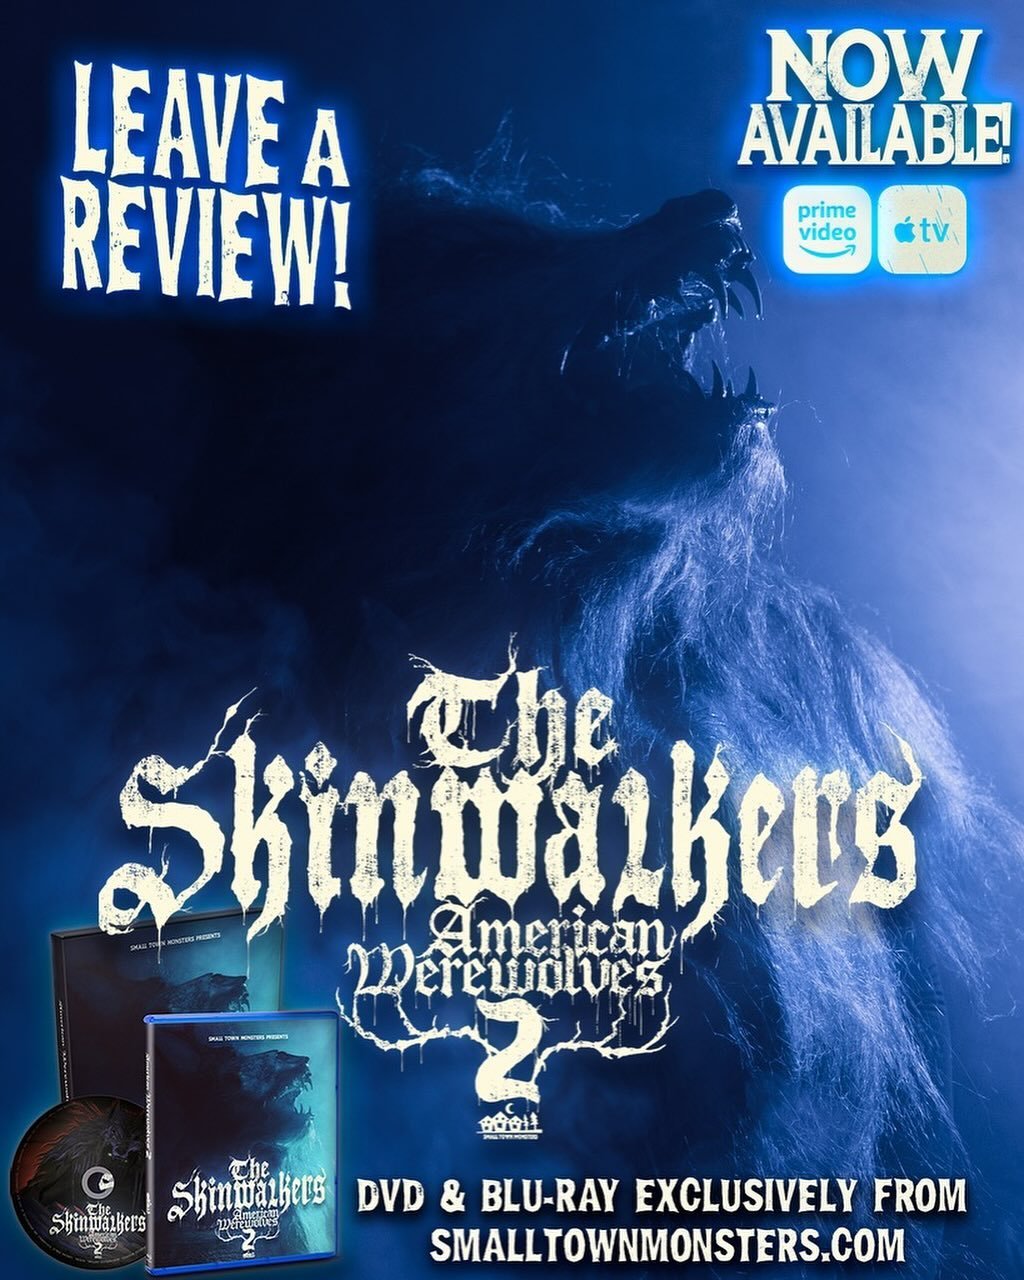 Stream The Skinwalkers: American Werewolves 2 today! After you&rsquo;ve seen the film be sure to leave a review to help other people find it. Streaming right now on Amazon and Apple. 

https://www.amazon.com/Skinwalkers-American-Werewolves-2/dp/B0CVB